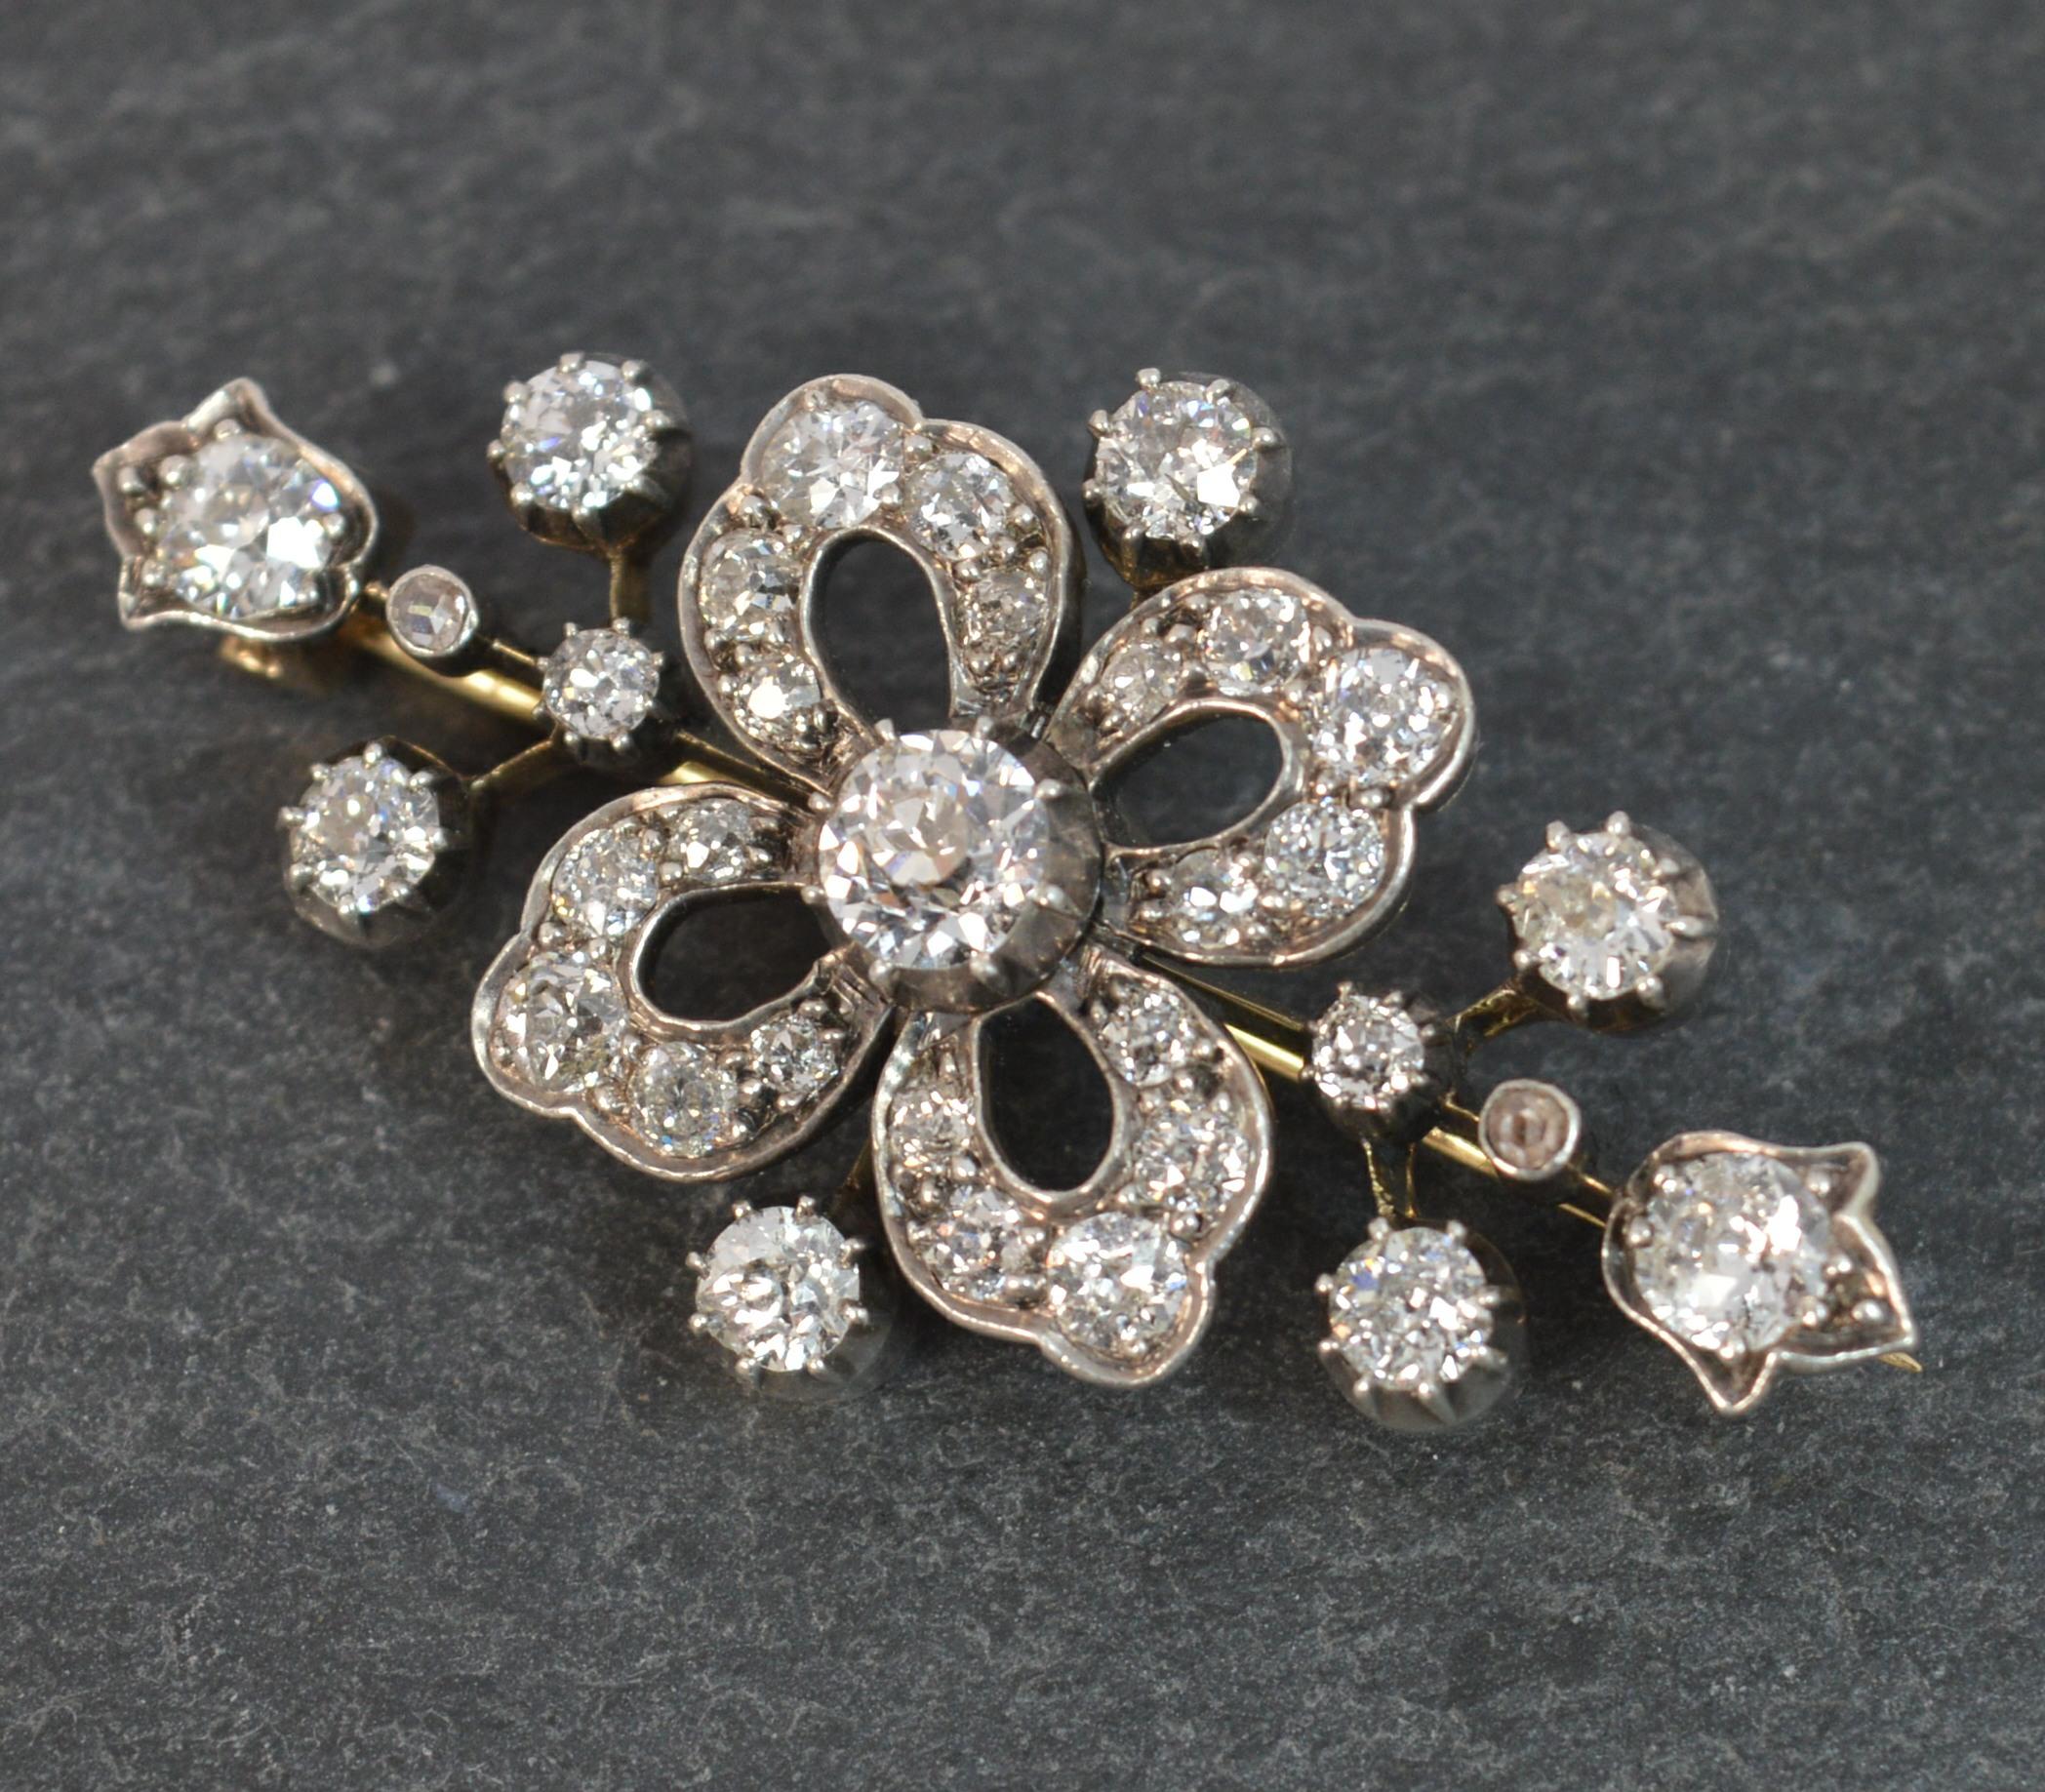 
An exceedingly good Victorian period brooch.

Modelled in 18ct rose gold with a silver head setting, typical of the period.

Set with many old cut diamonds, each of VS clarity, g-h colour and a total carat weight of approx 2.5 carats. Central